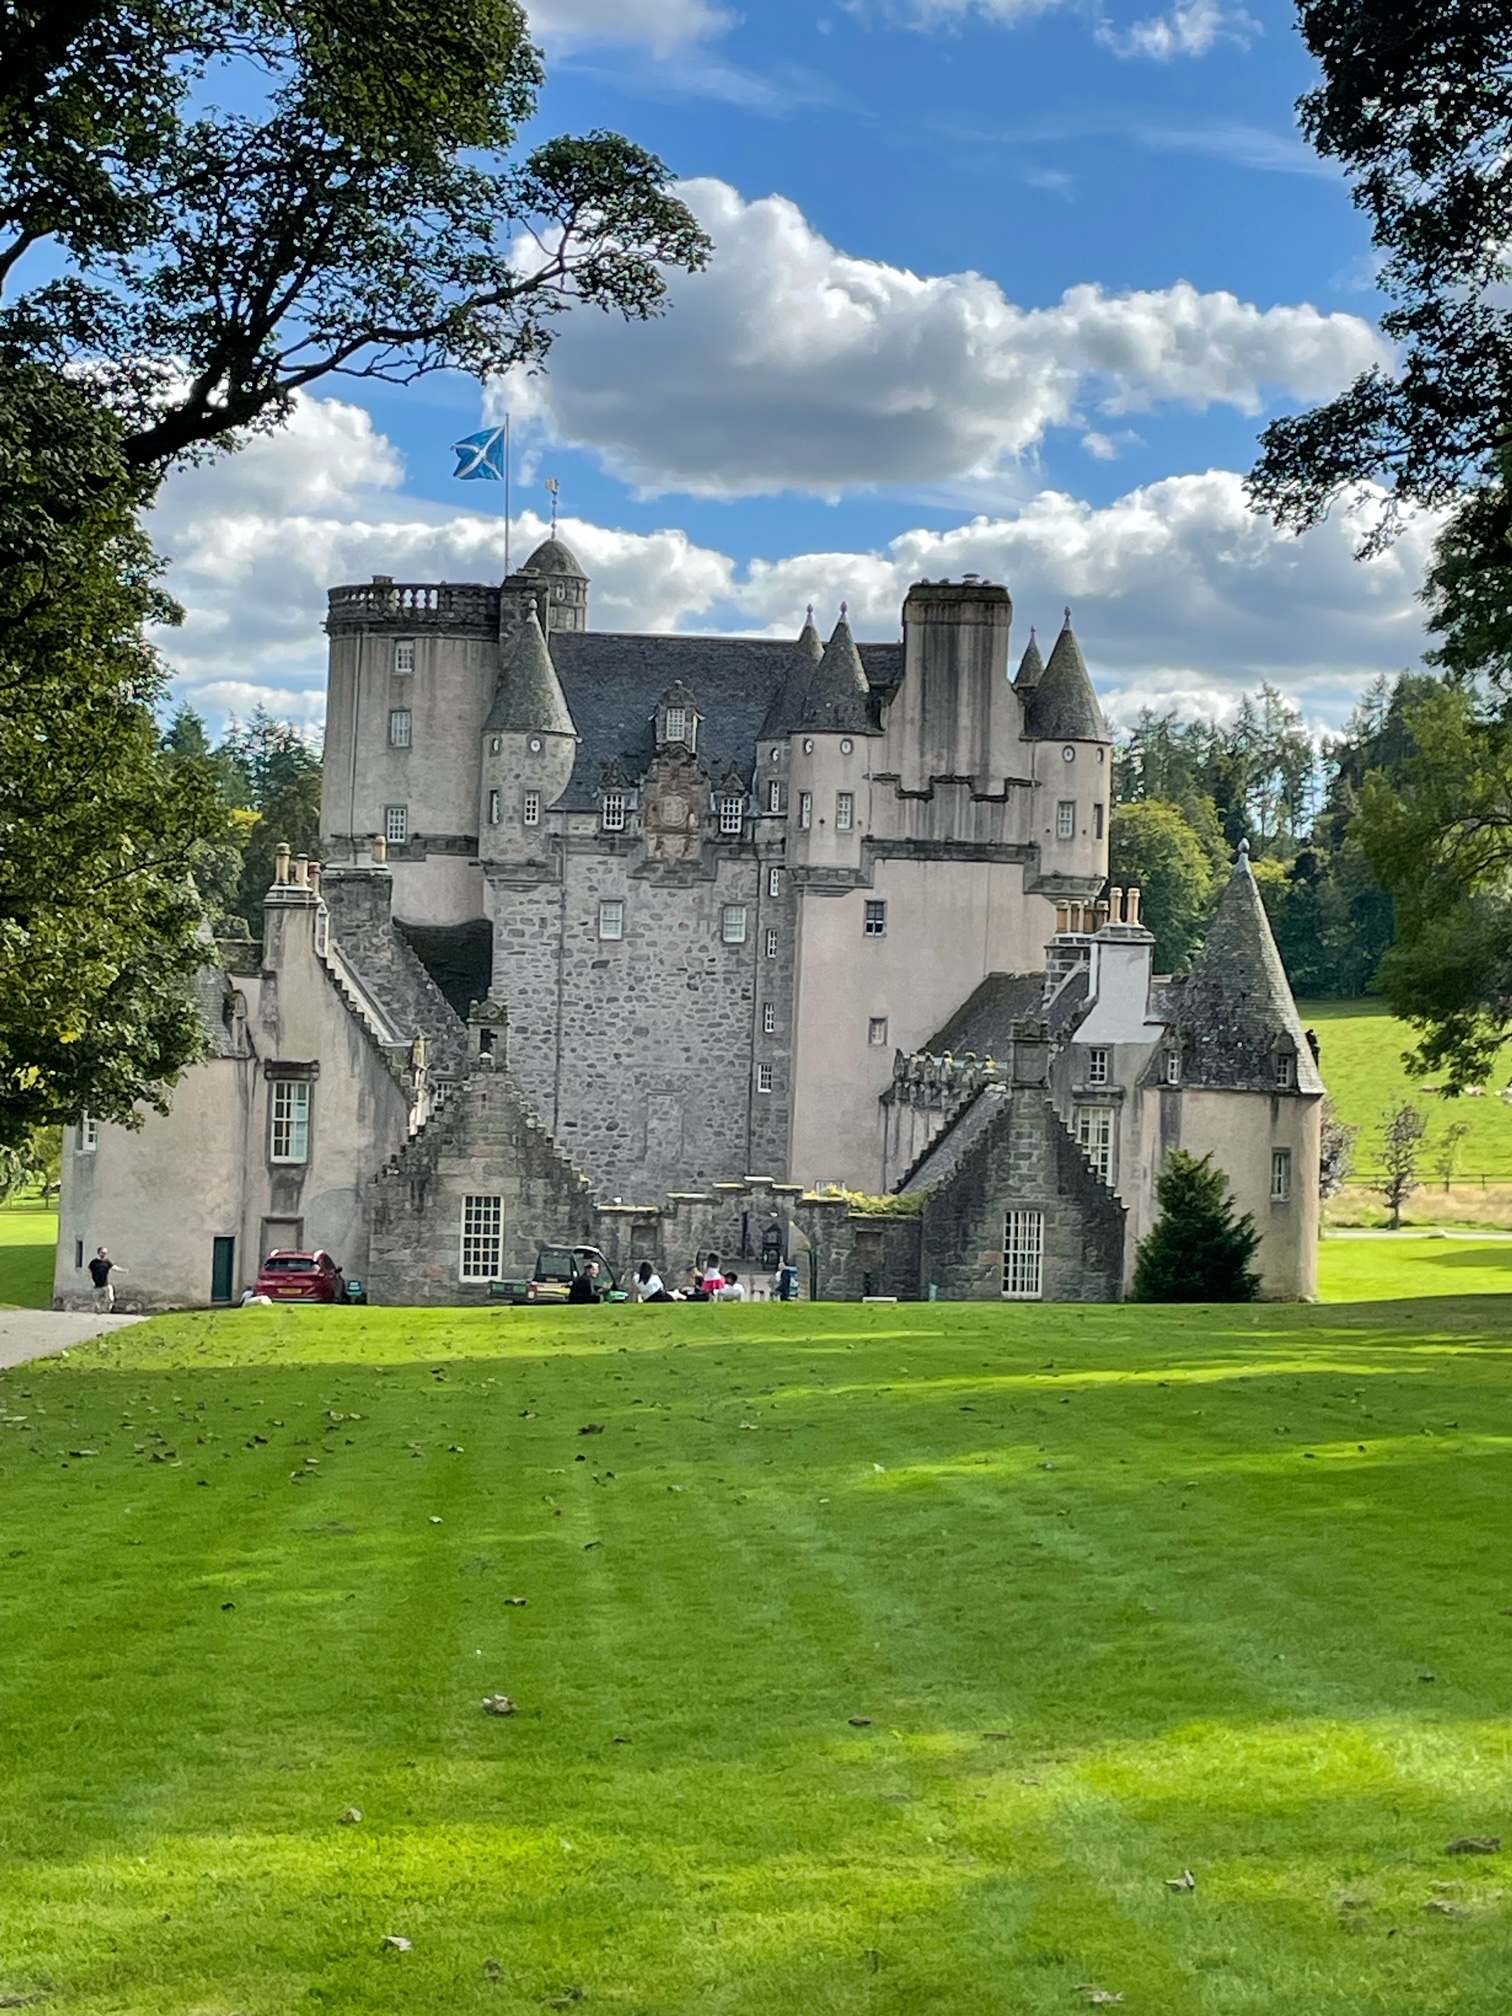 Castle Fraser is one of Scotland's largest tower houses. There are numerous furnished rooms accessed by climbing the narrow turret stairs. 